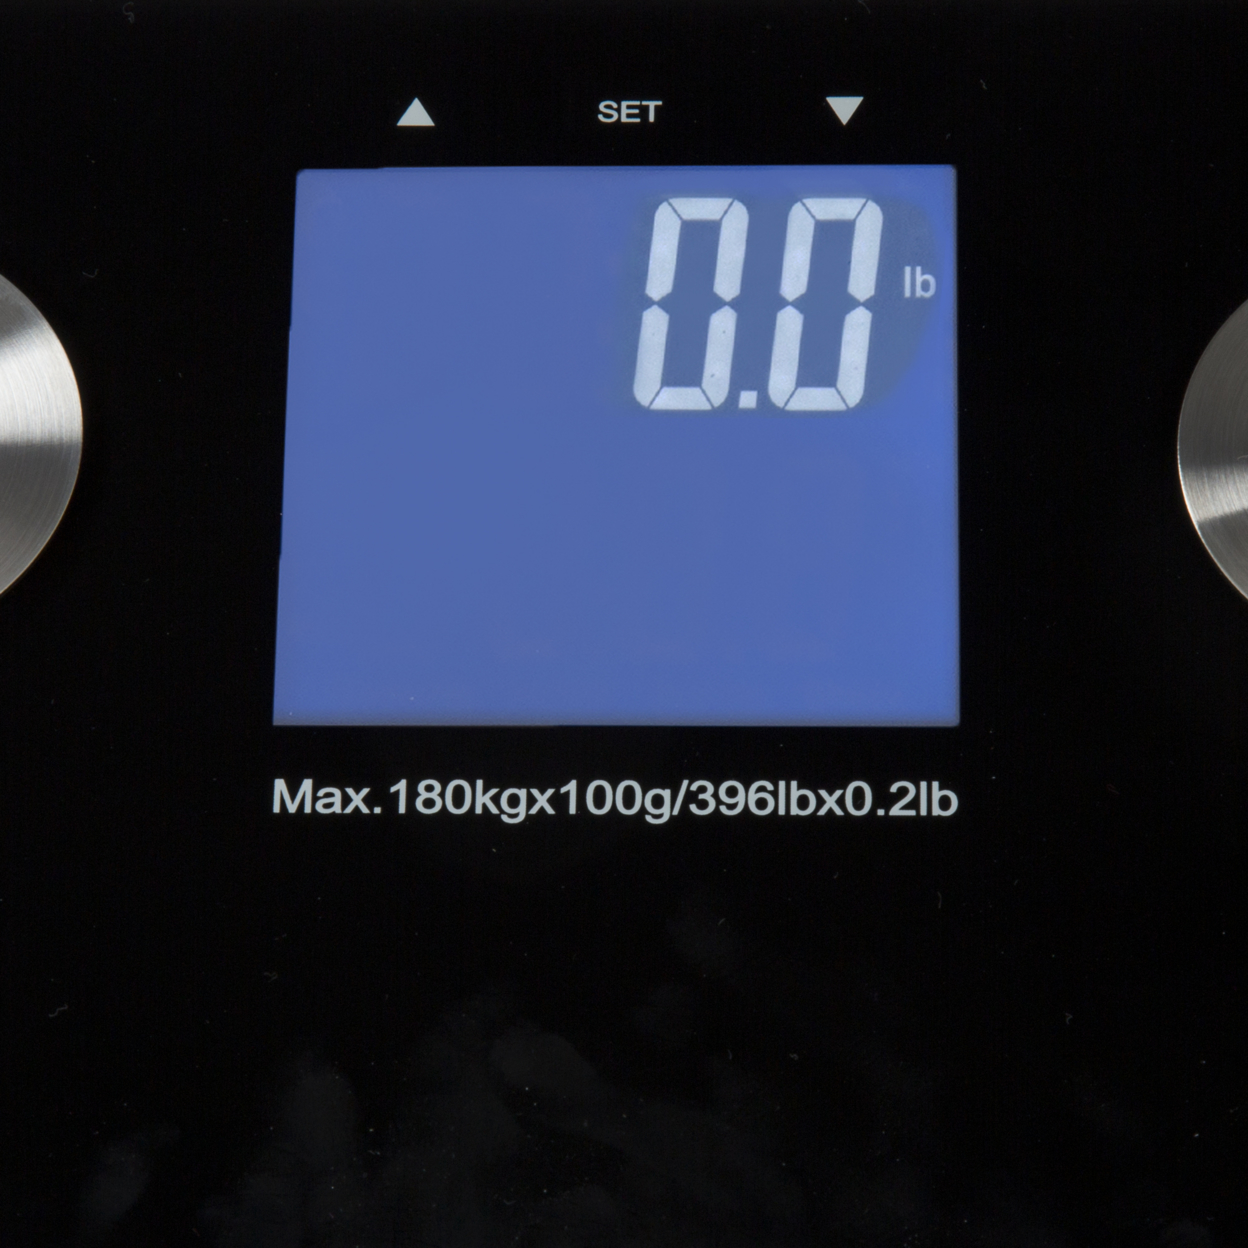 Bluestone Digital Body Fat Scale With Large LCD Display